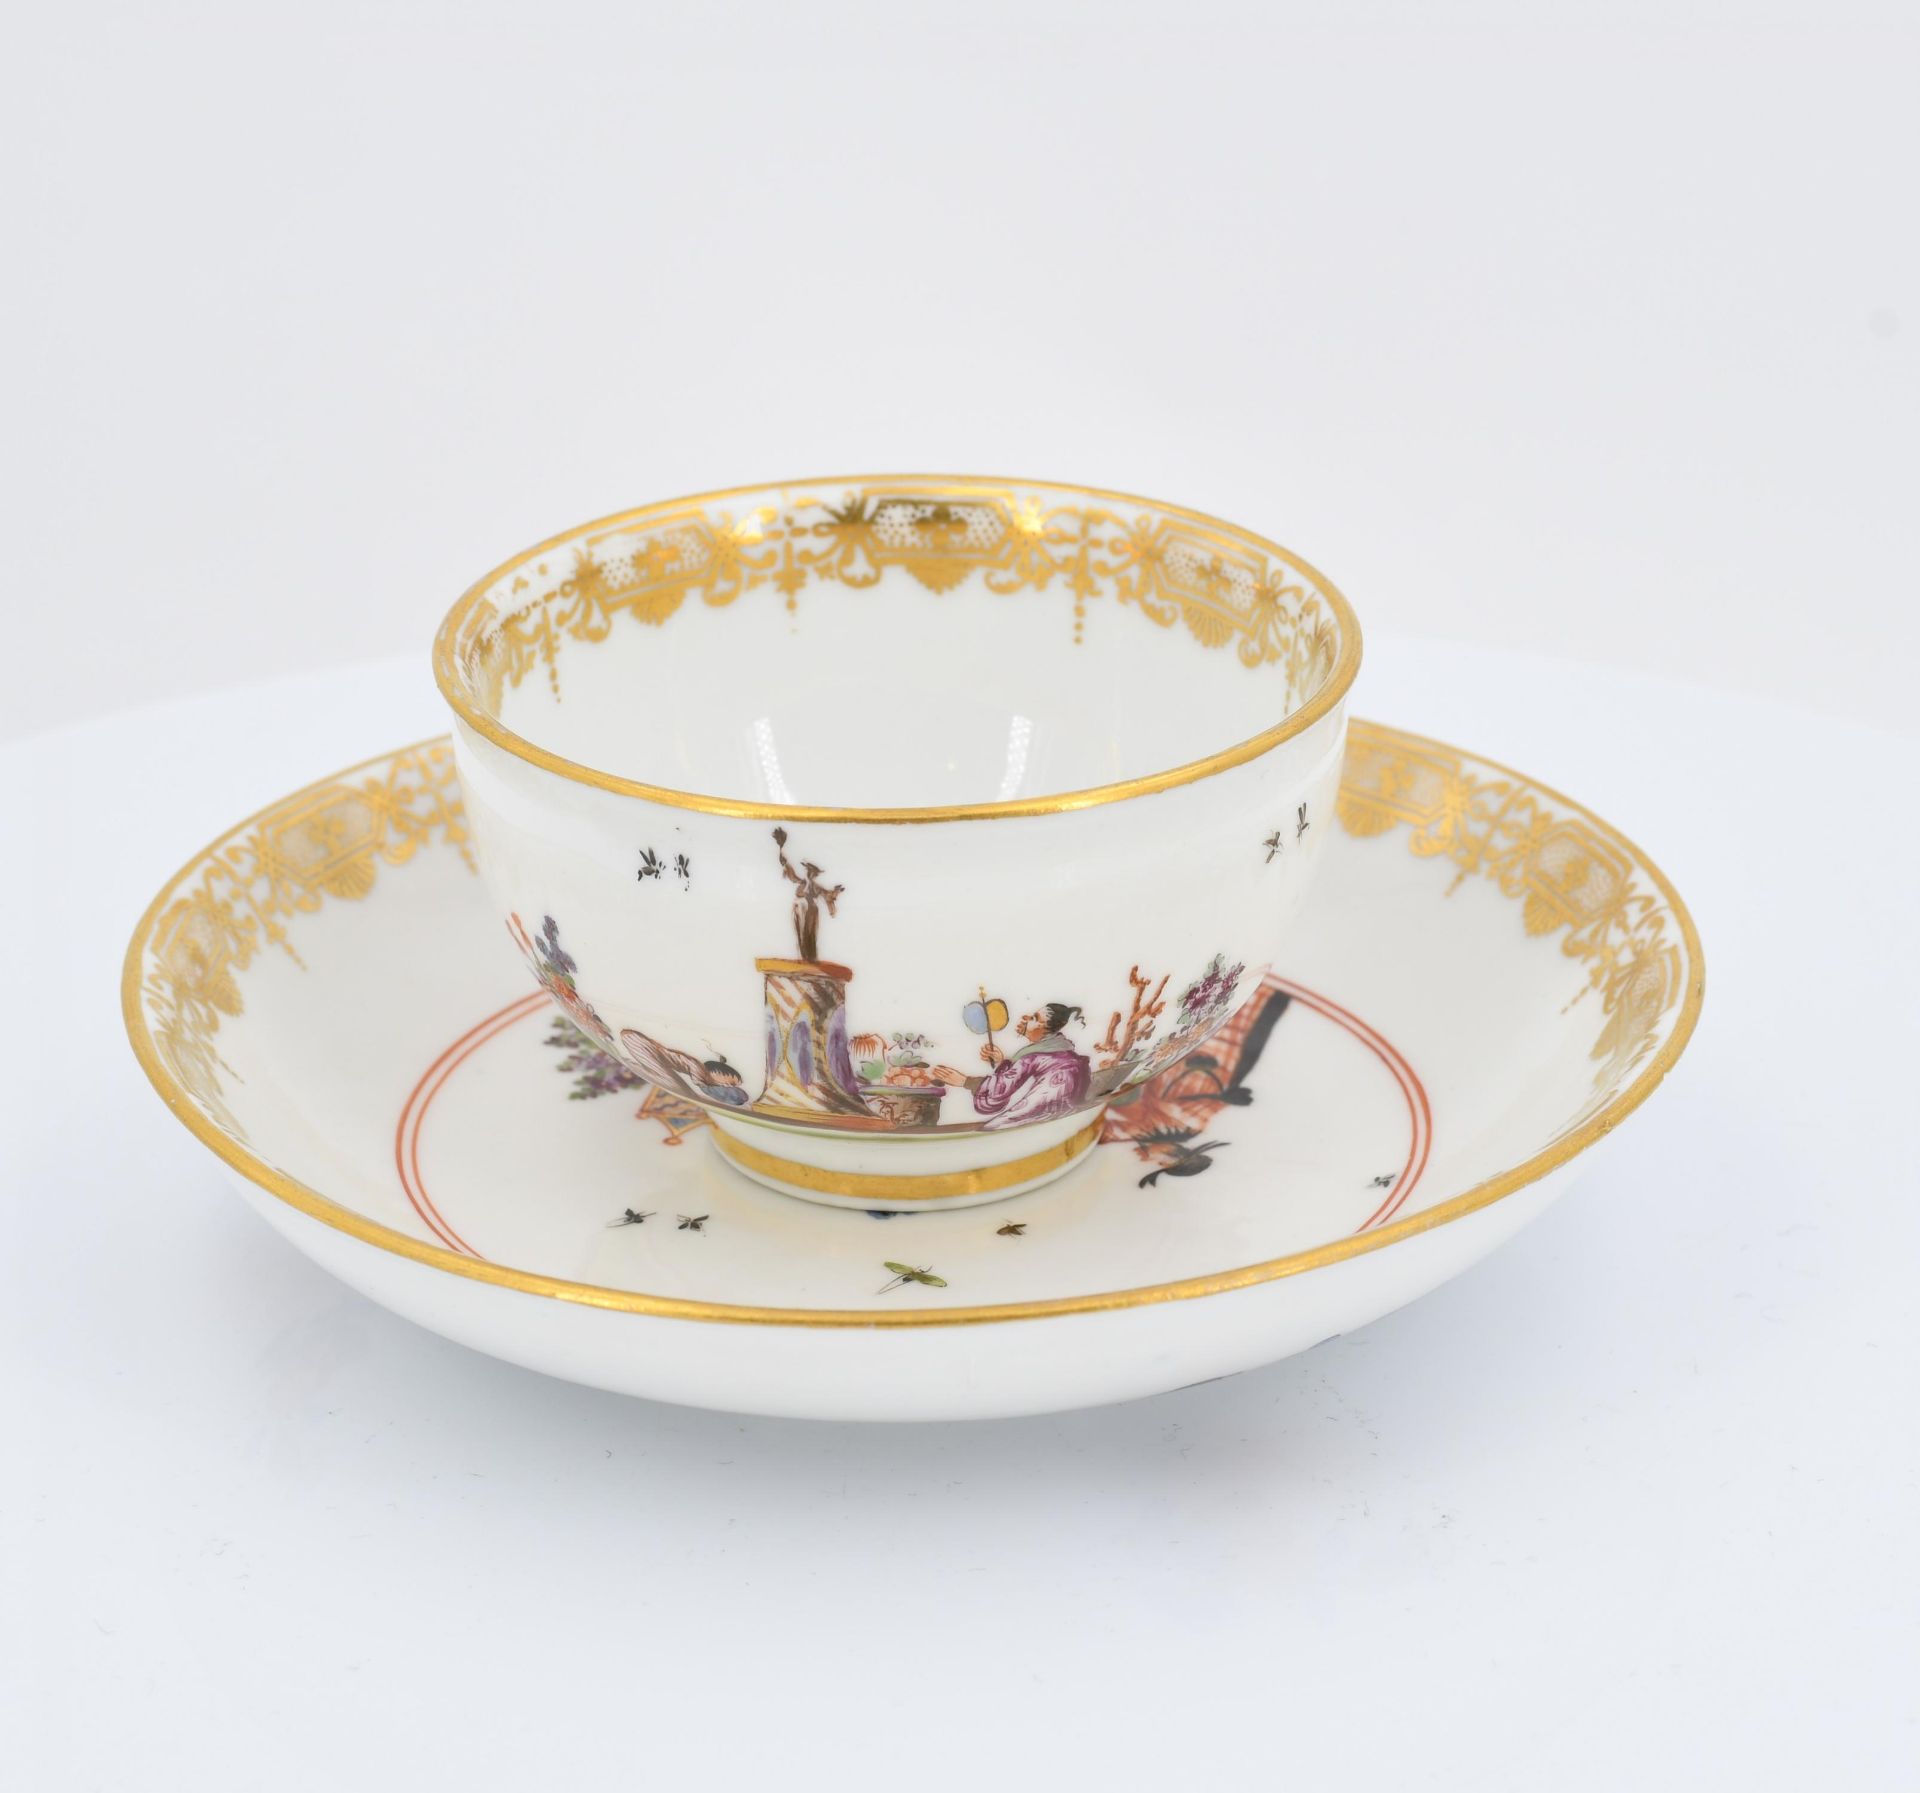 Tea bowl and saucer with chinoiseries - Image 4 of 7